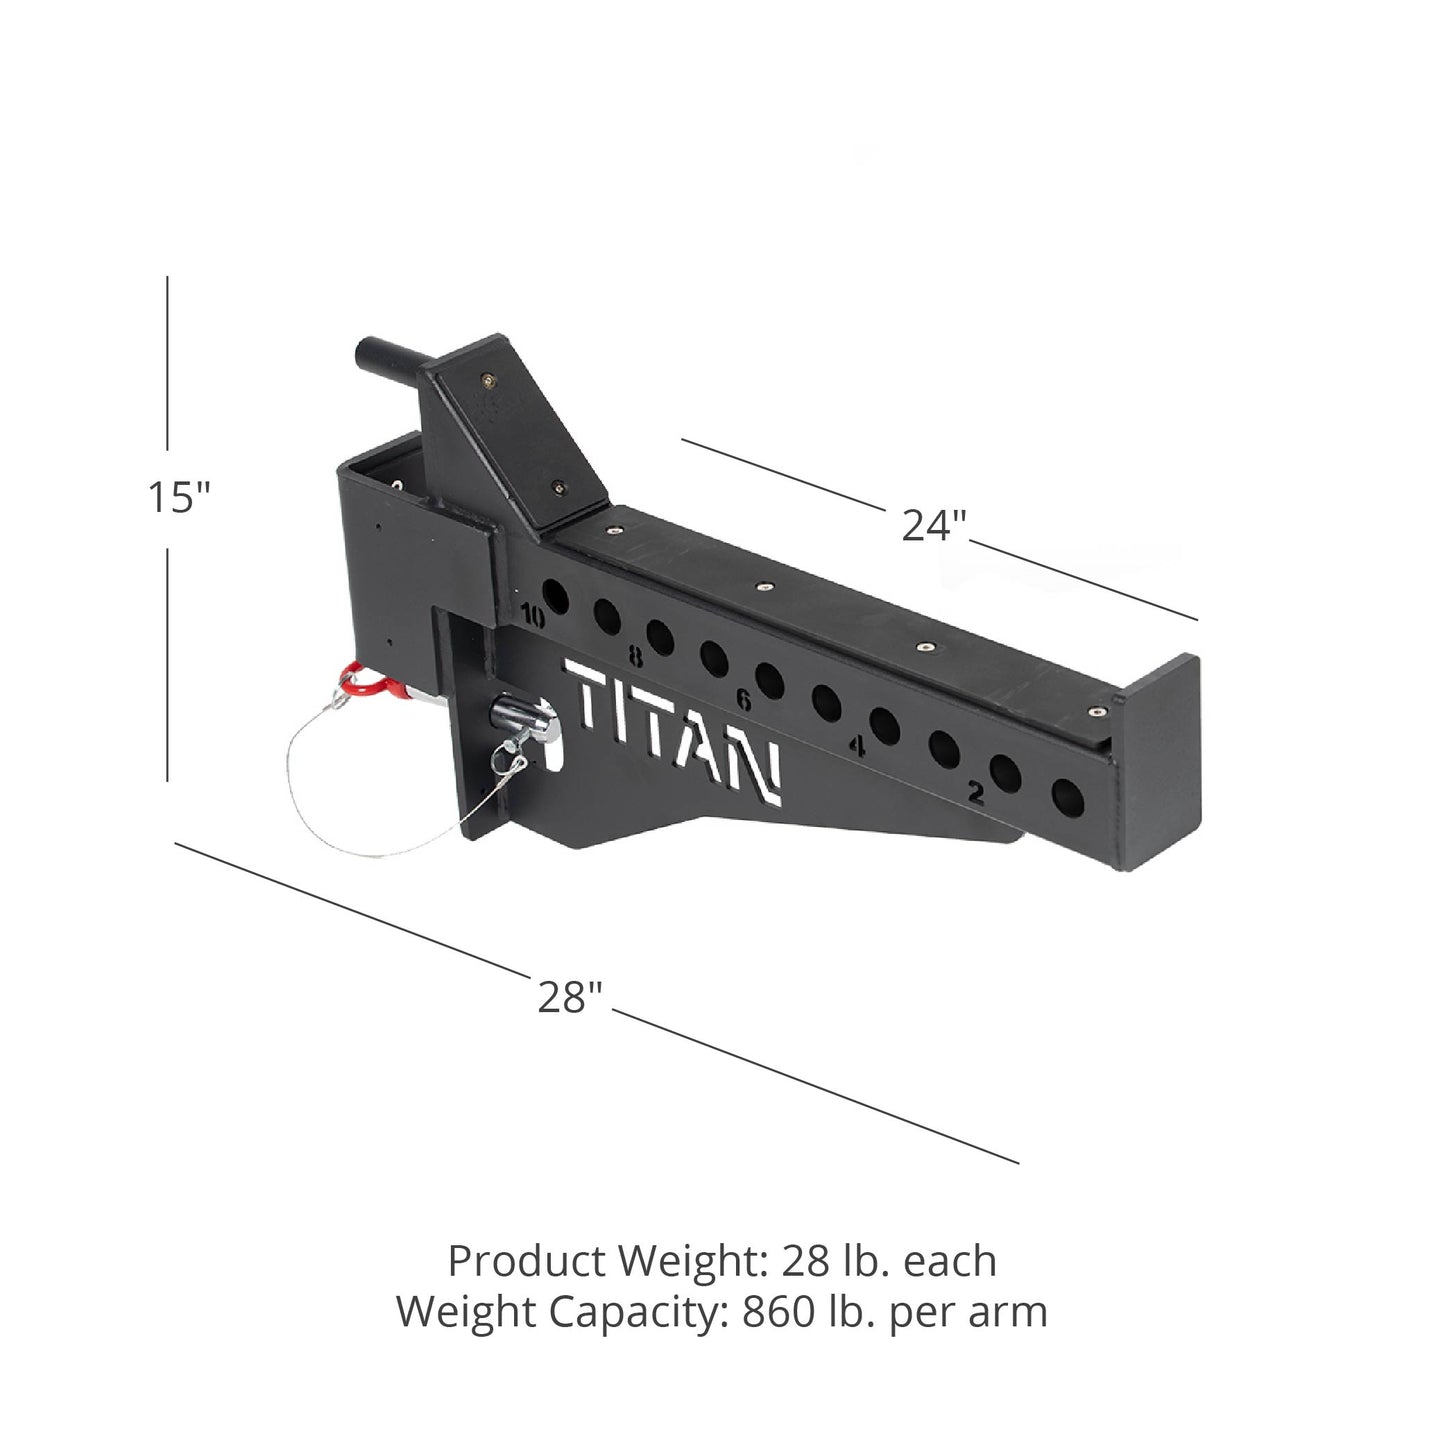 TITAN Series Spotter Arms - 24" Useable Length x 28" Overall Length - view 5